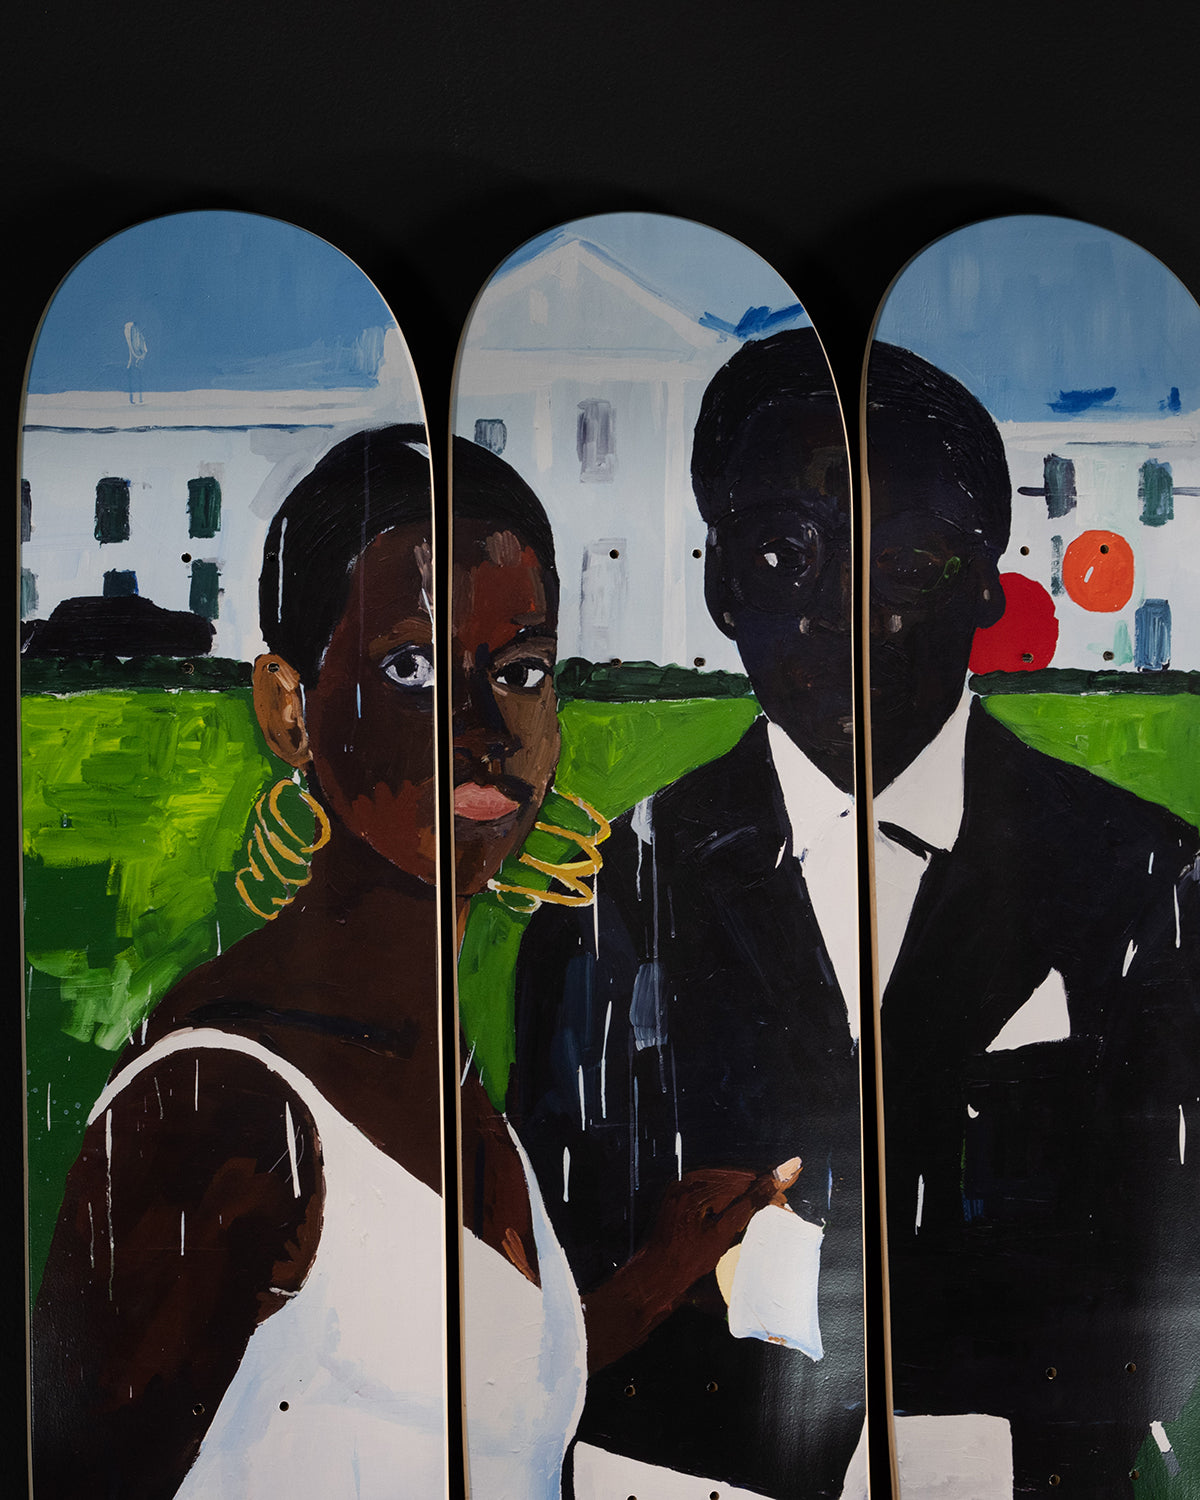 Henry Taylor Cicely and Miles Visit the Obamas Set of Skateboards